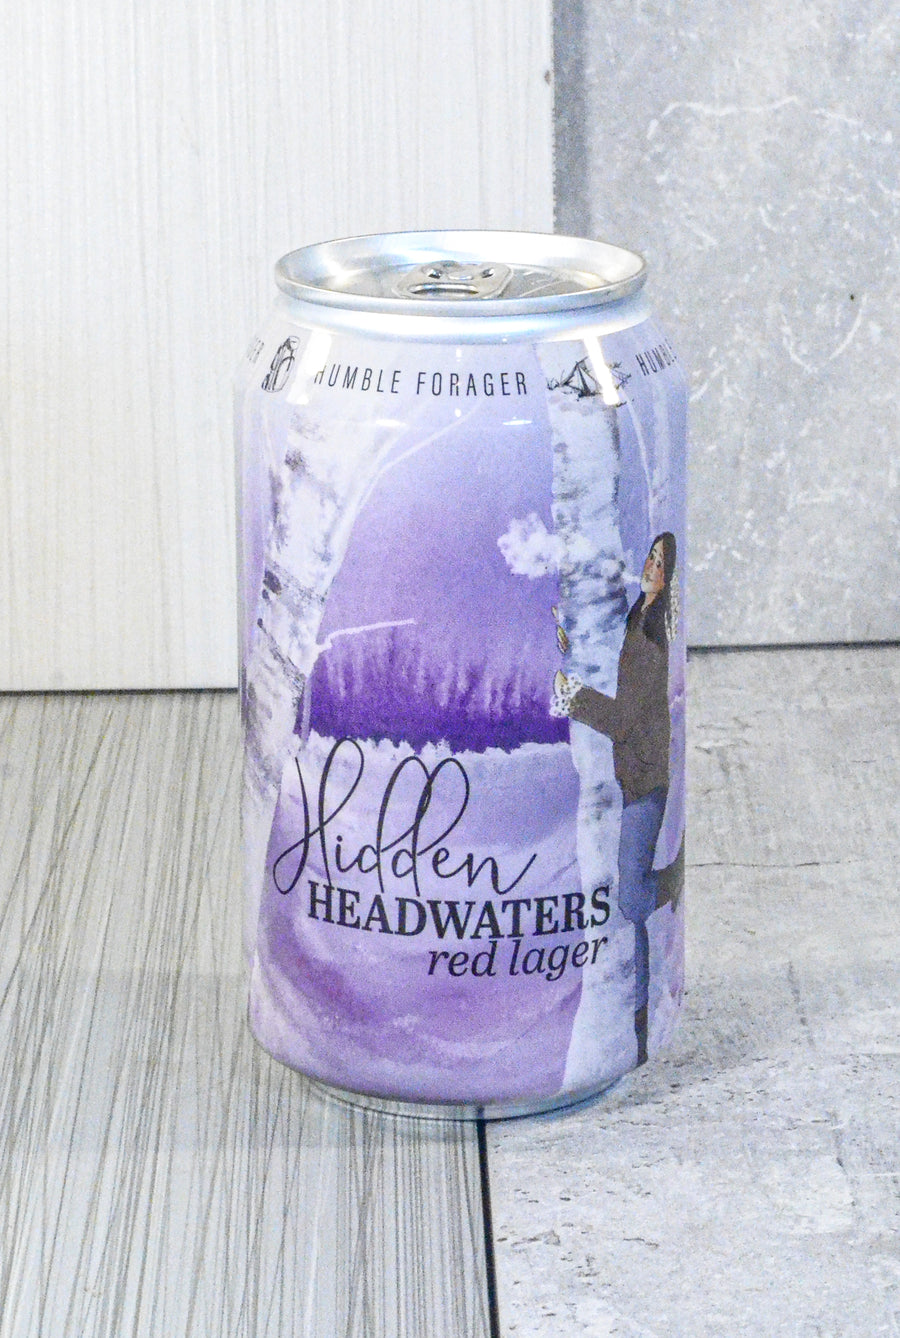 Humble Forager, Hidden Headwaters Red Lager SINGLE